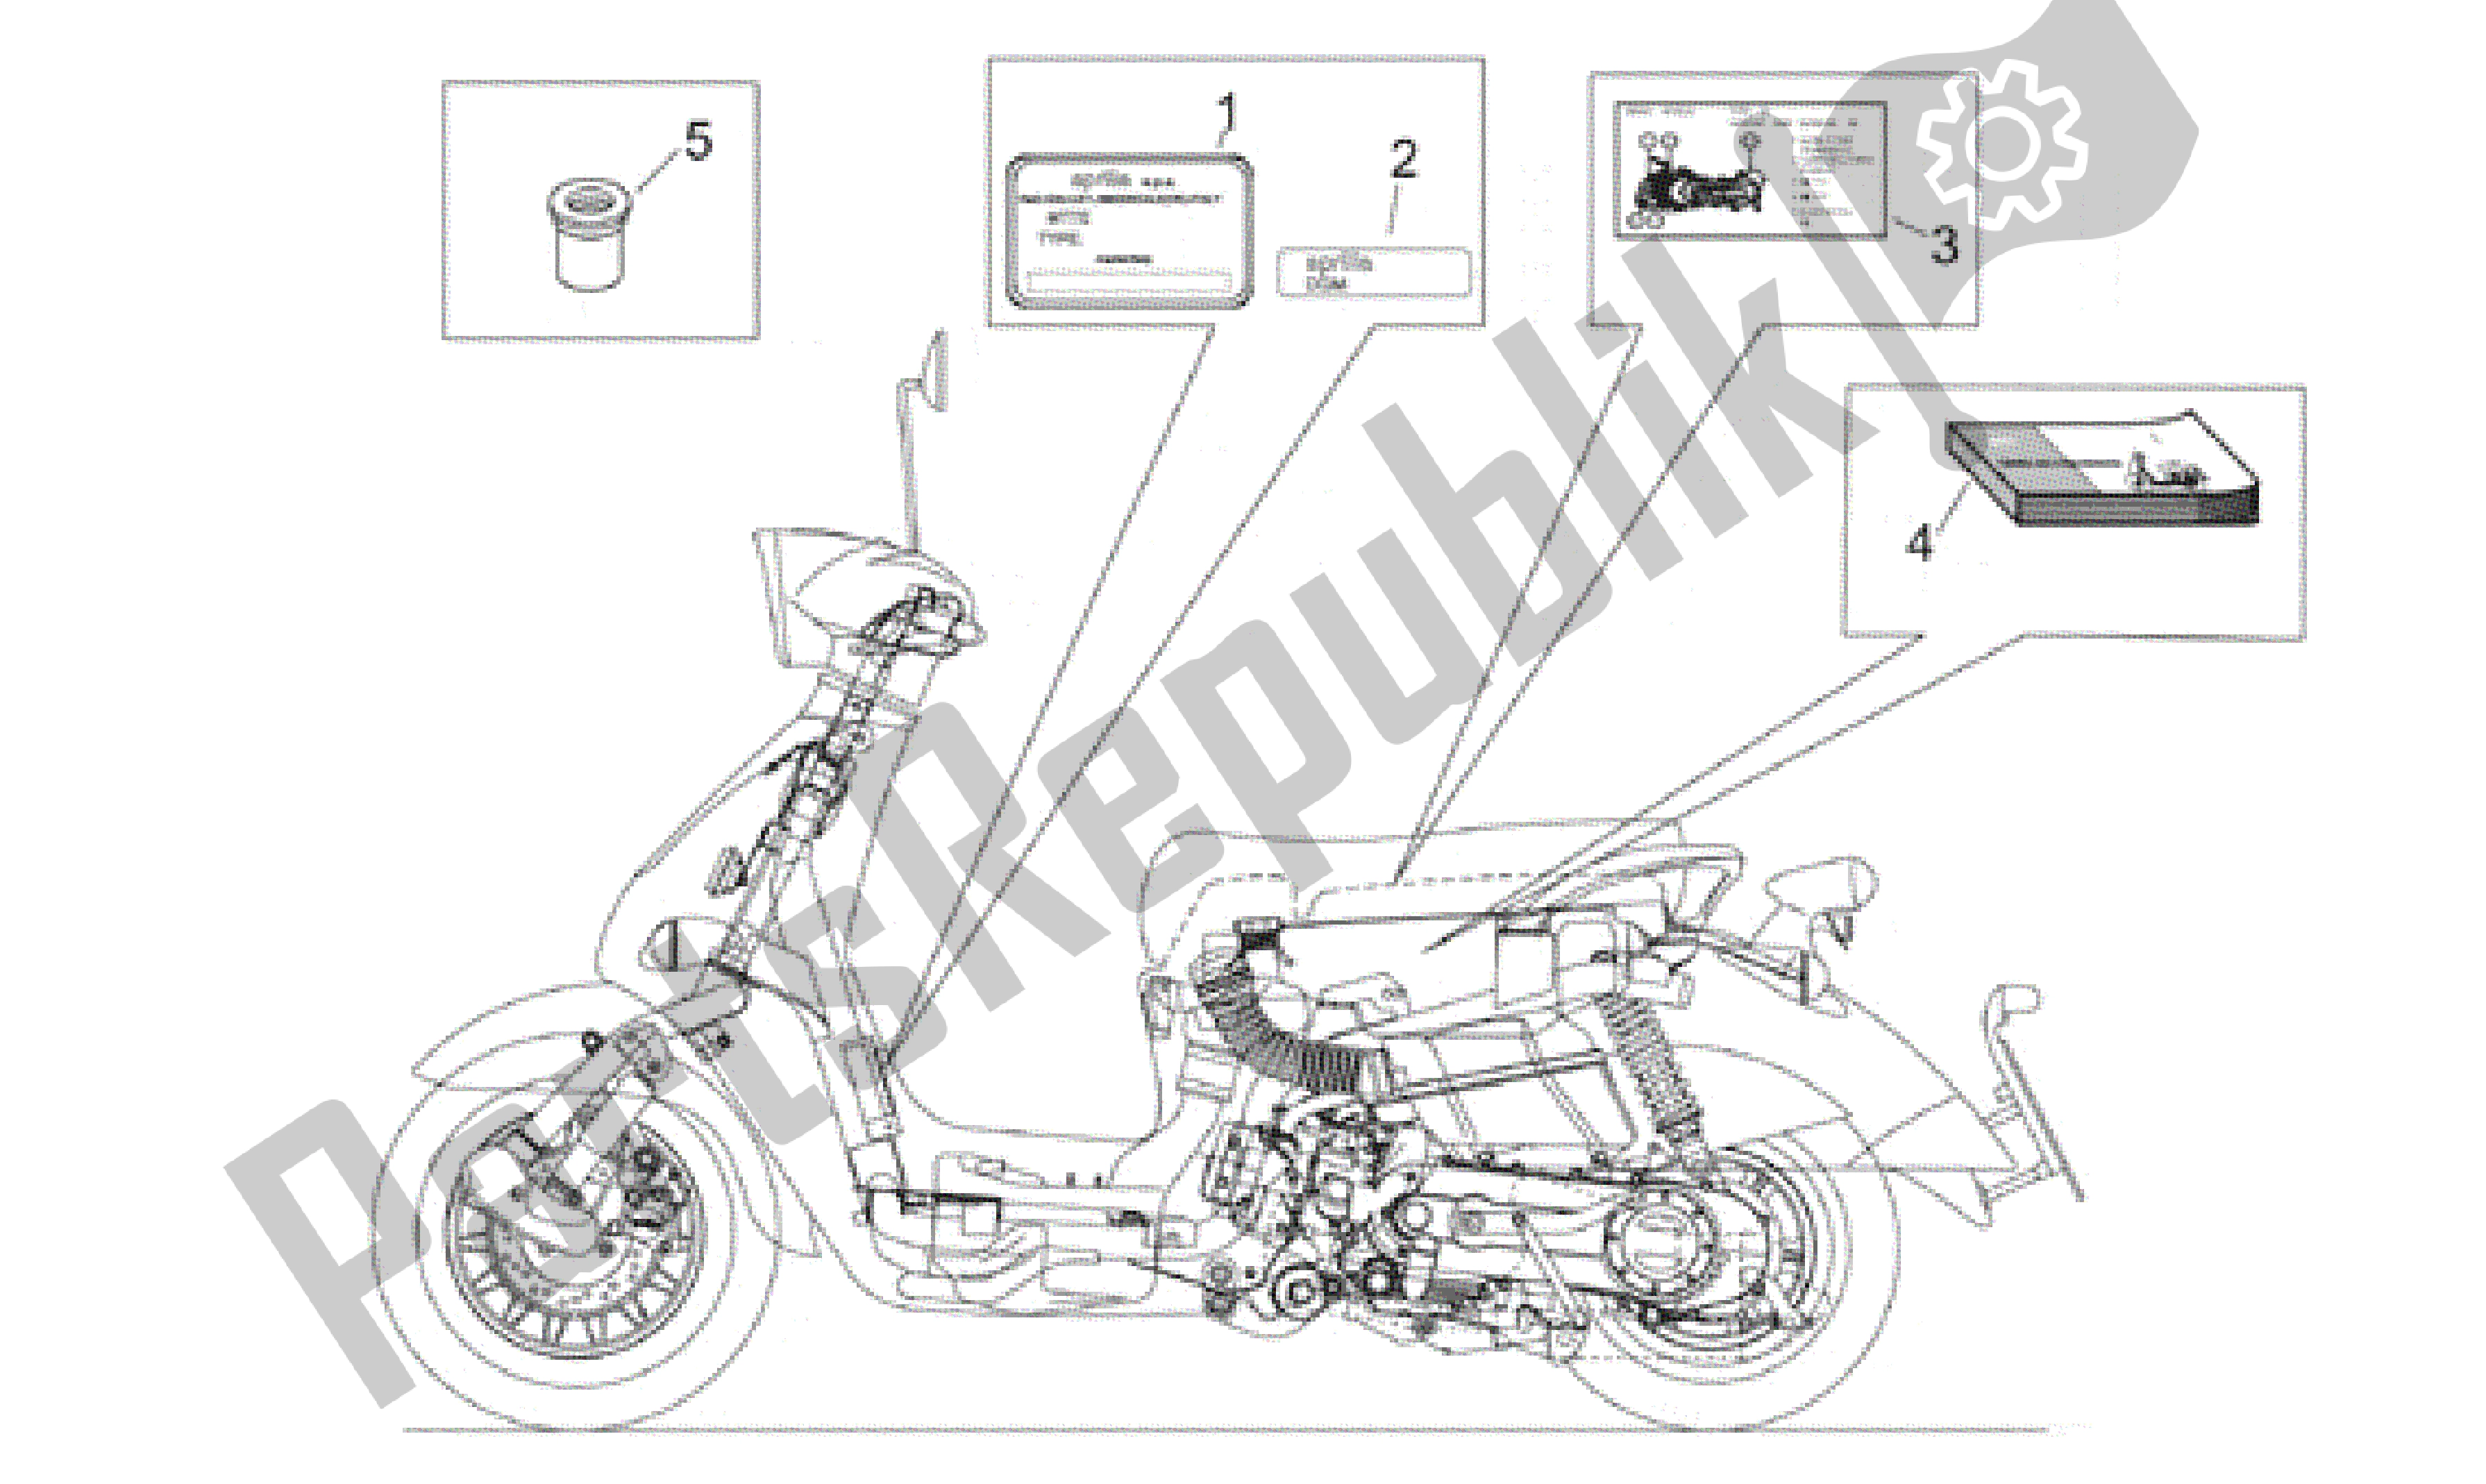 All parts for the Plate Set And Handbook of the Aprilia Habana 125 1999 - 2001